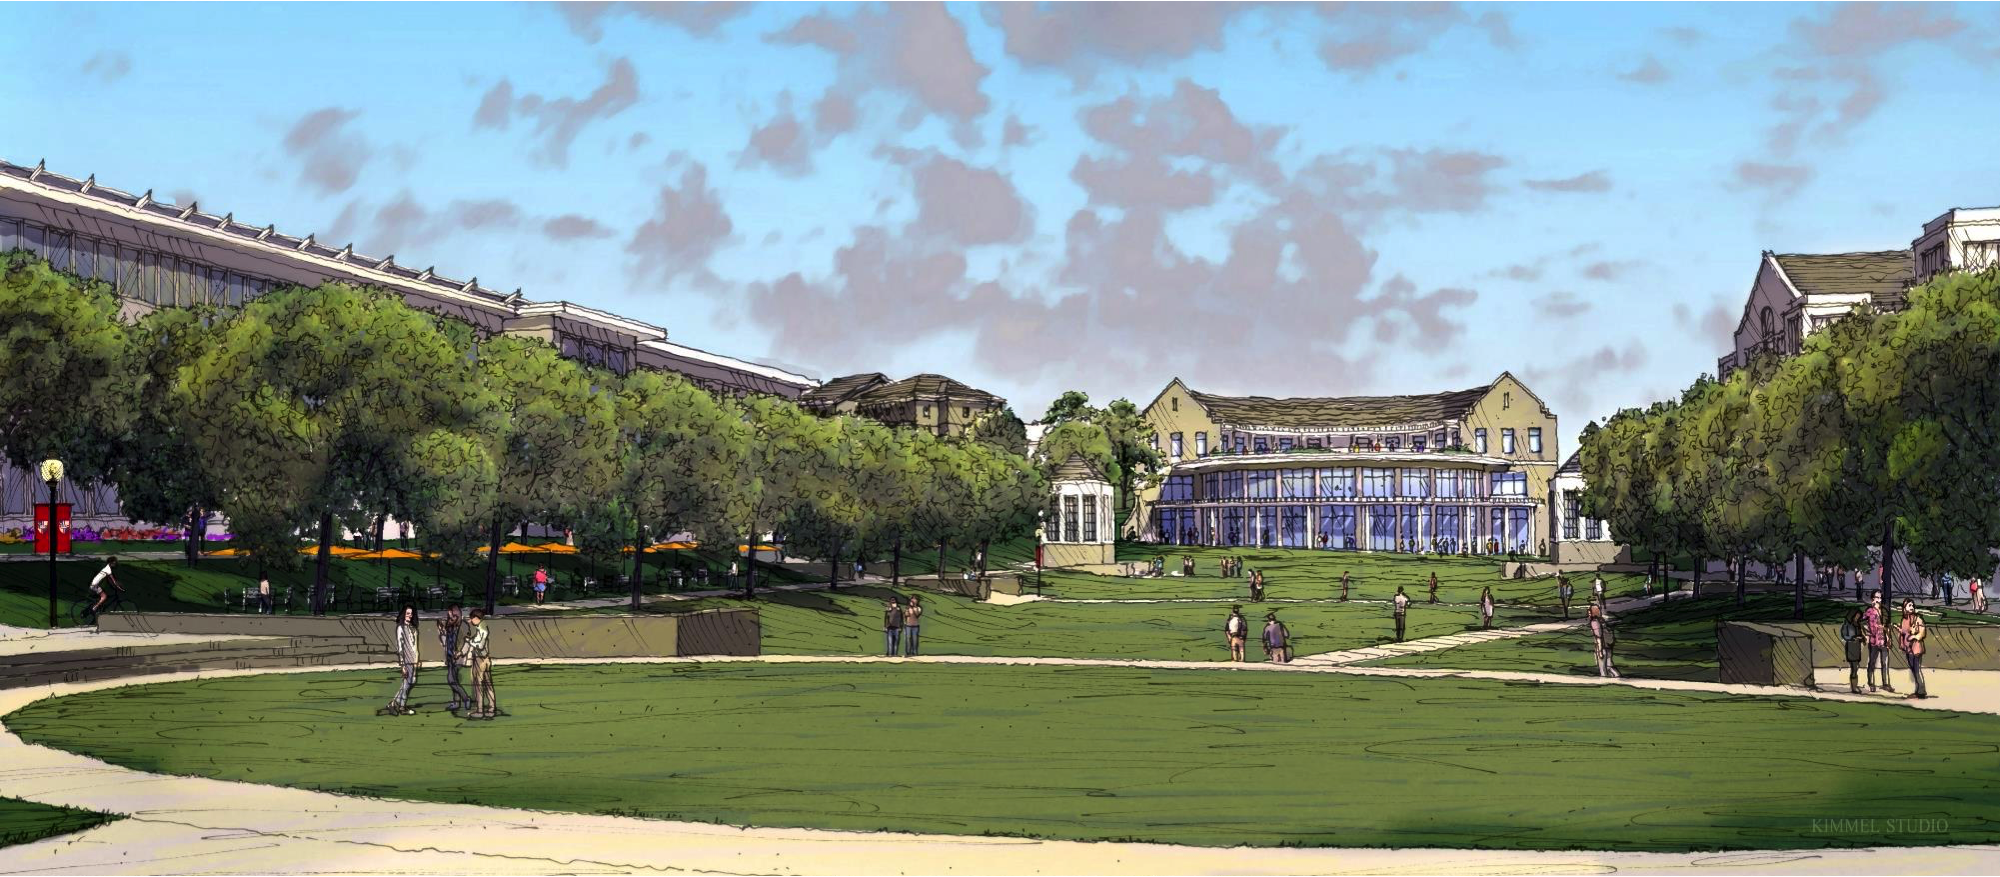 future dining hall rendering